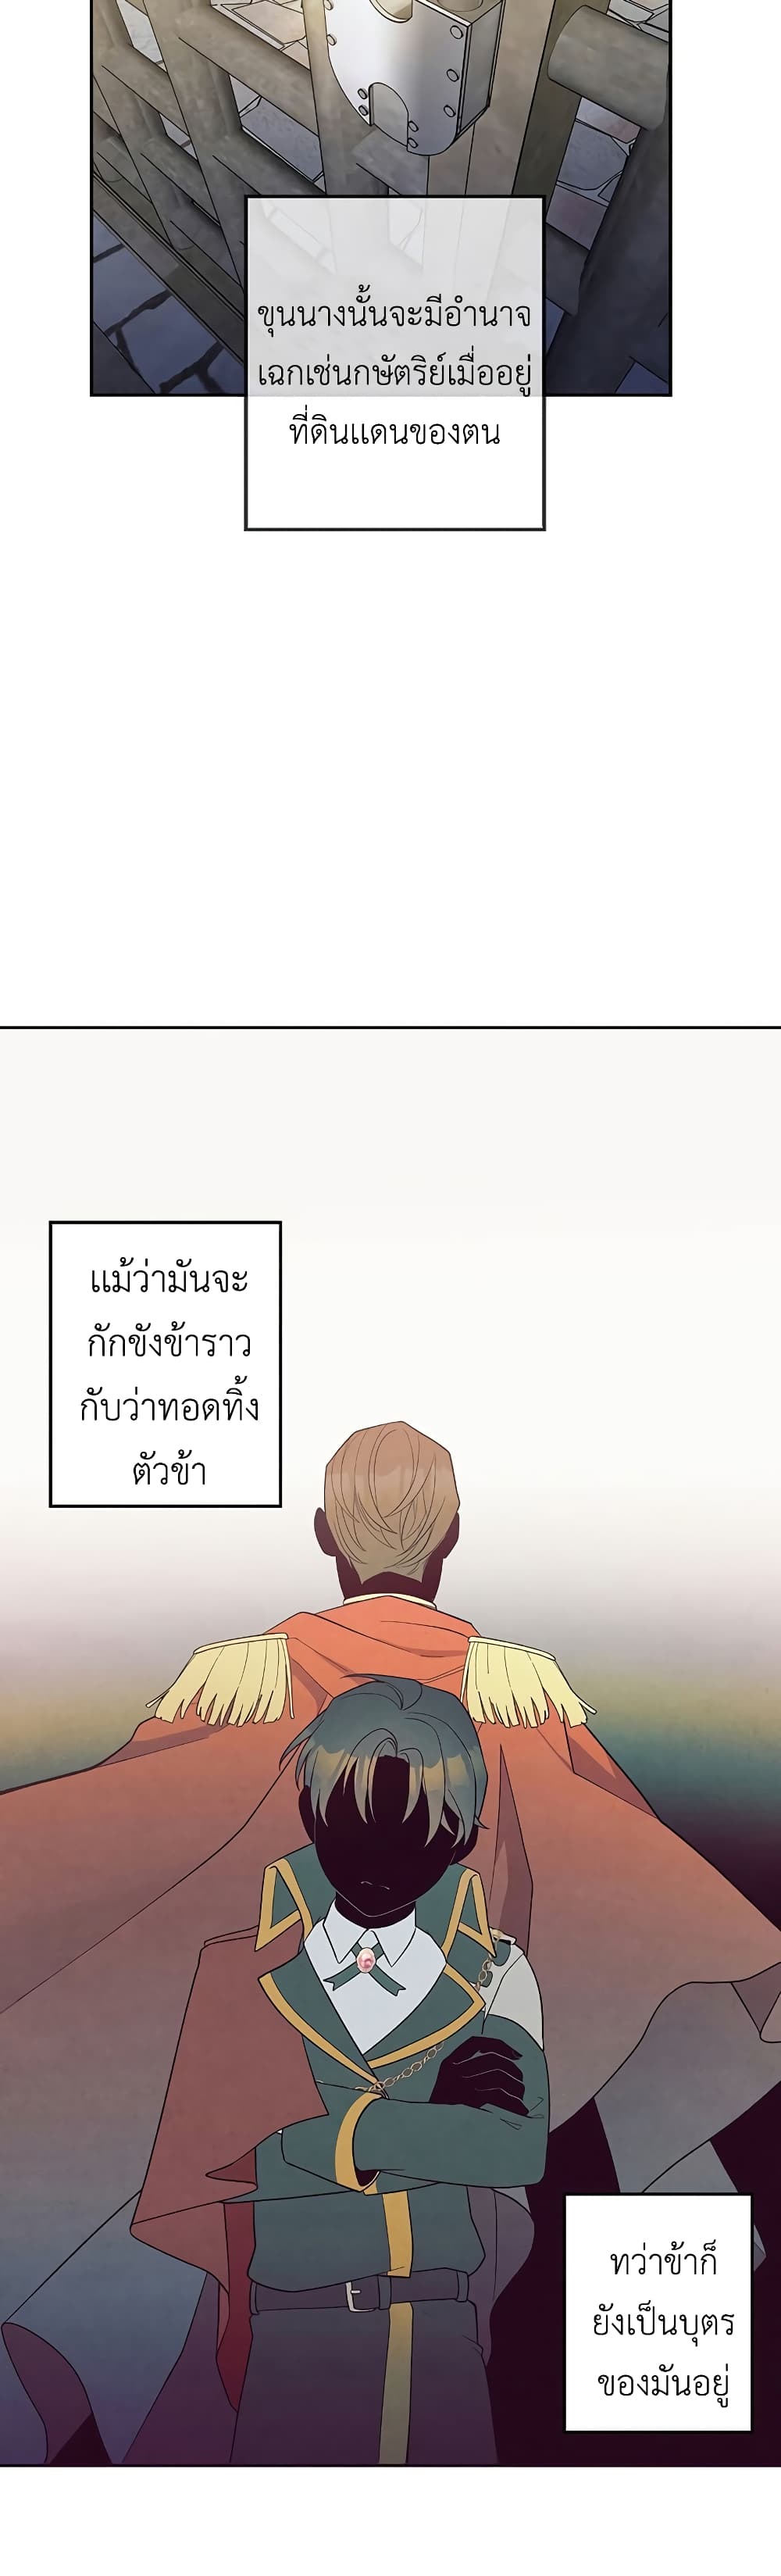 Legendary Youngest Son of the Marquis House 7 แปลไทย